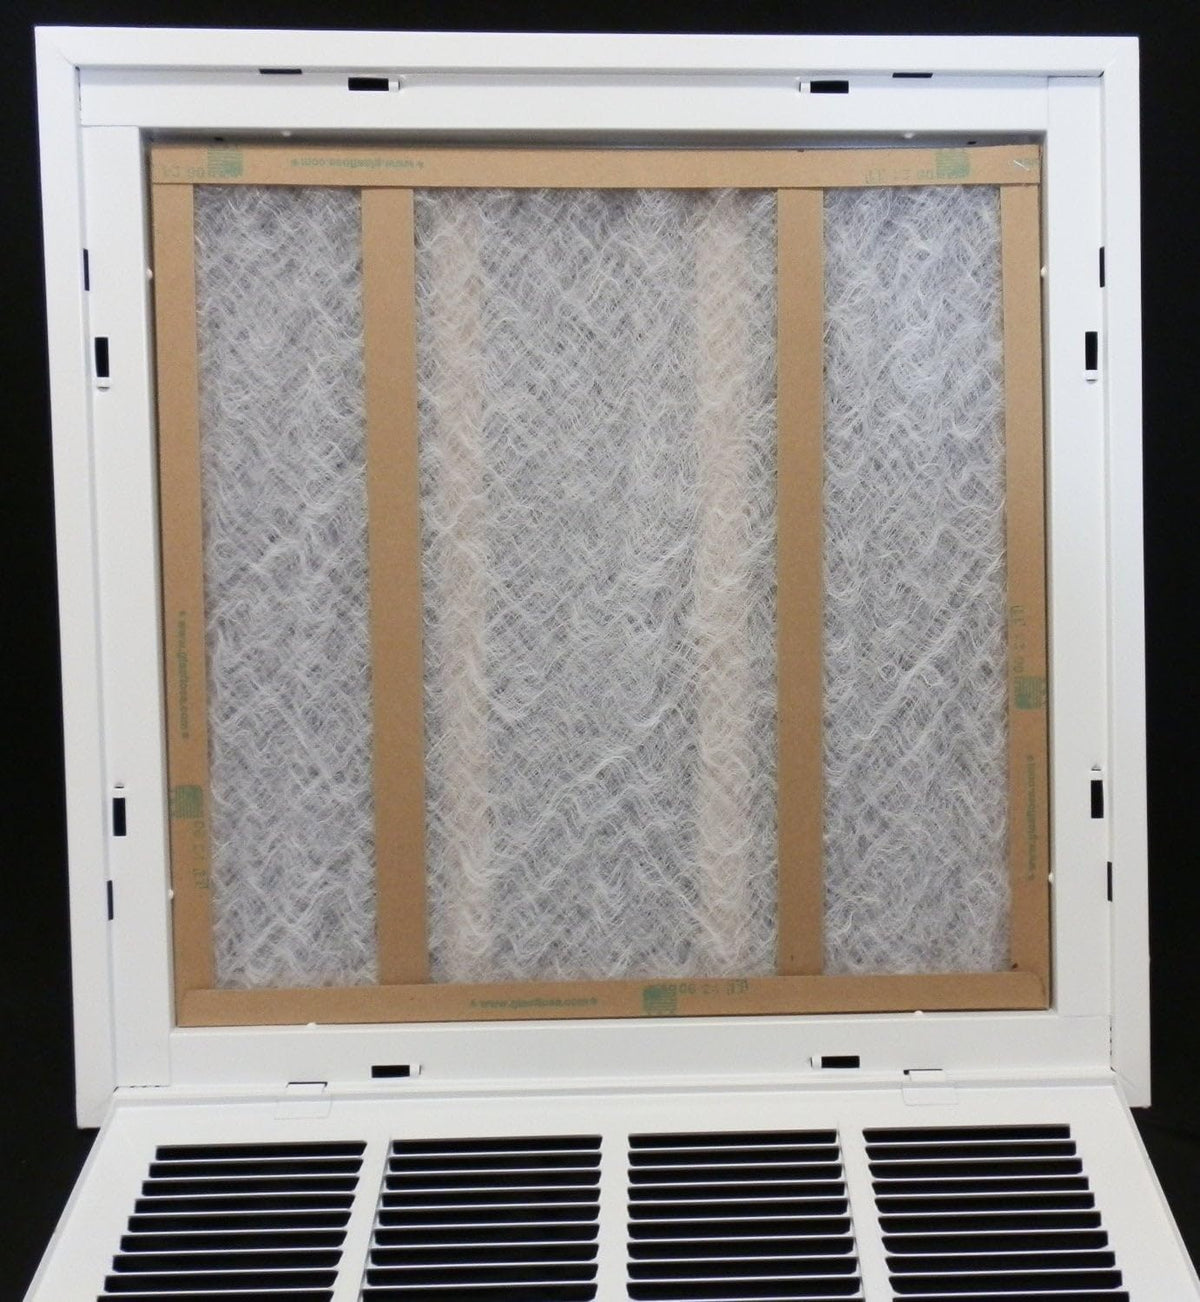 24&quot; X 14&quot; Steel Return Air Filter Grille for 1&quot; Filter - Removable Frame - [Outer Dimensions: 26 5/8&quot; X 16 5/8&quot;]